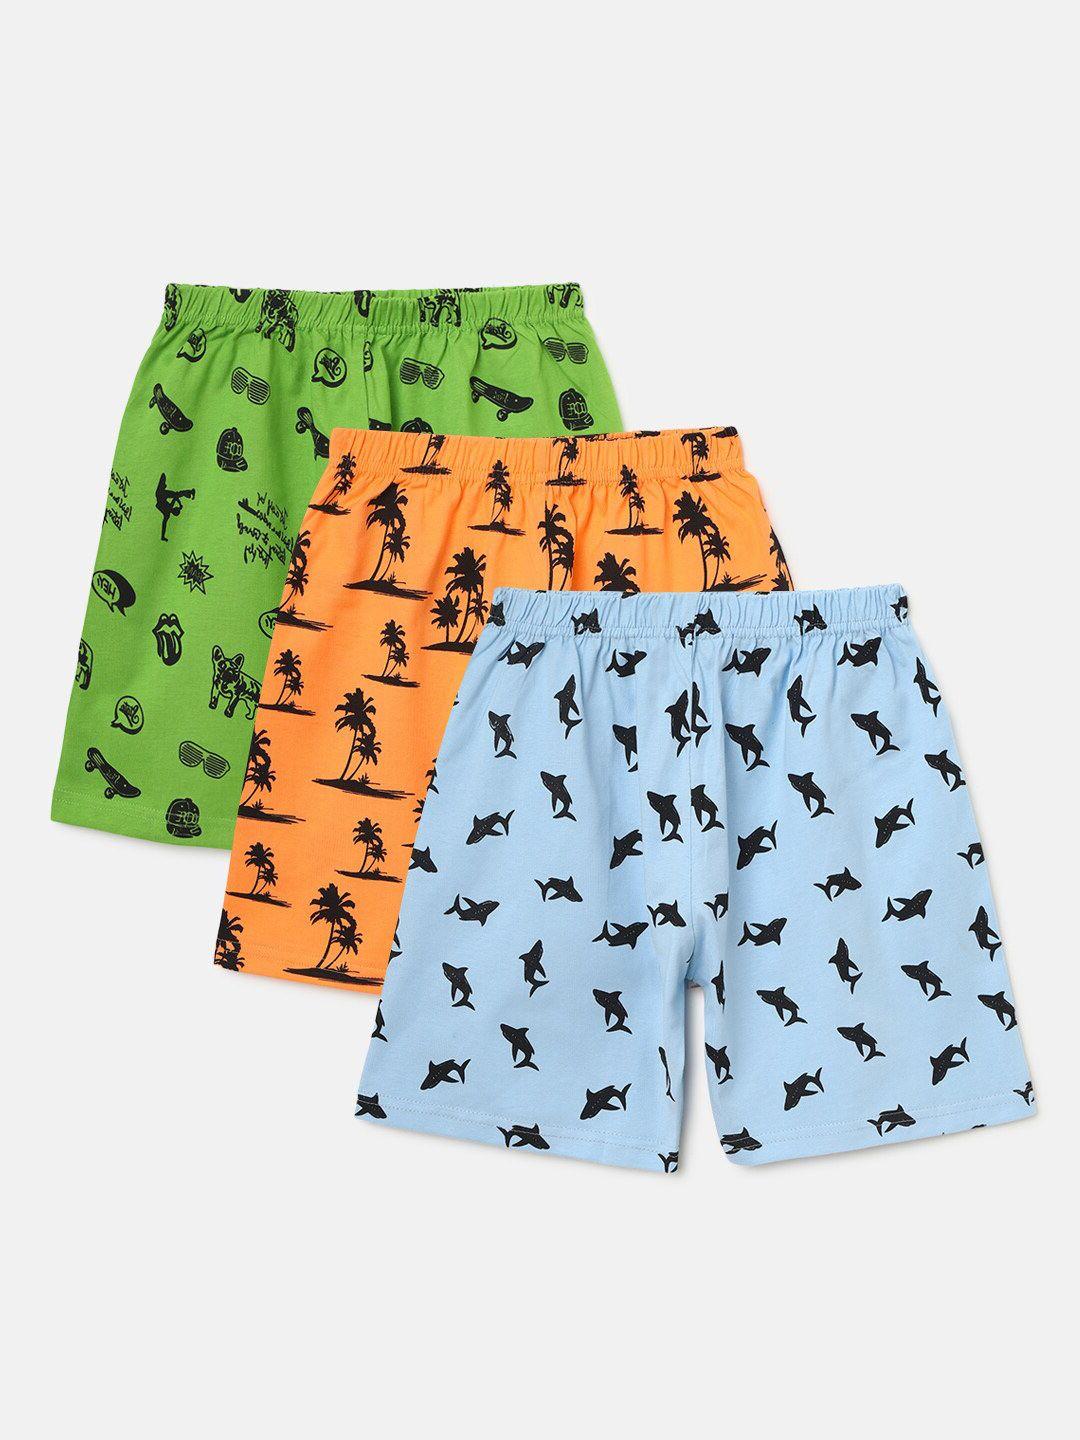 homegrown boys set of 3 printed pure cotton outdoor shorts